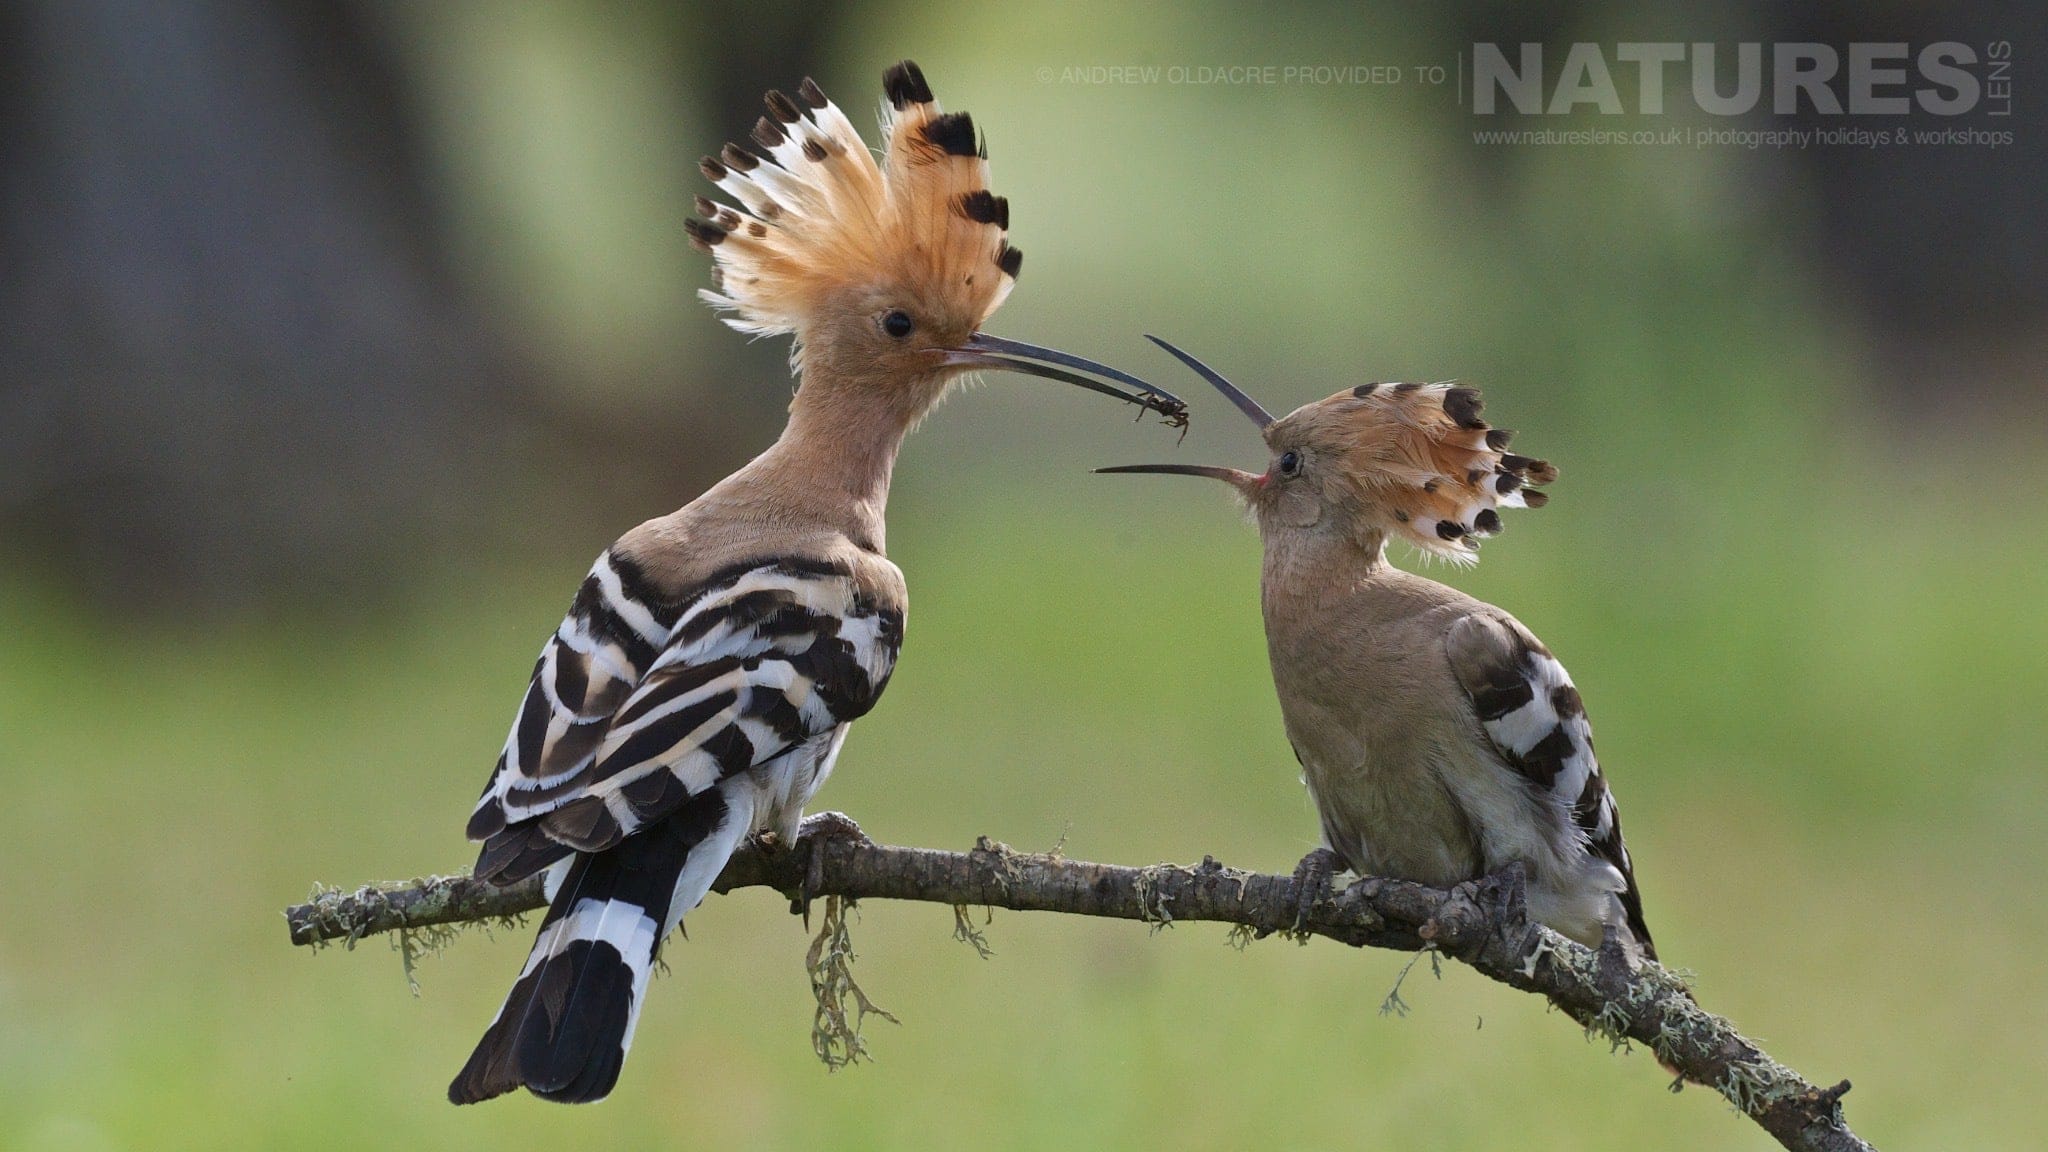 A Hoopoe Feeding It'S Young In A Spanish Olive Grove - Photographed On The Natureslens Birds Of Calera Photography Holiday